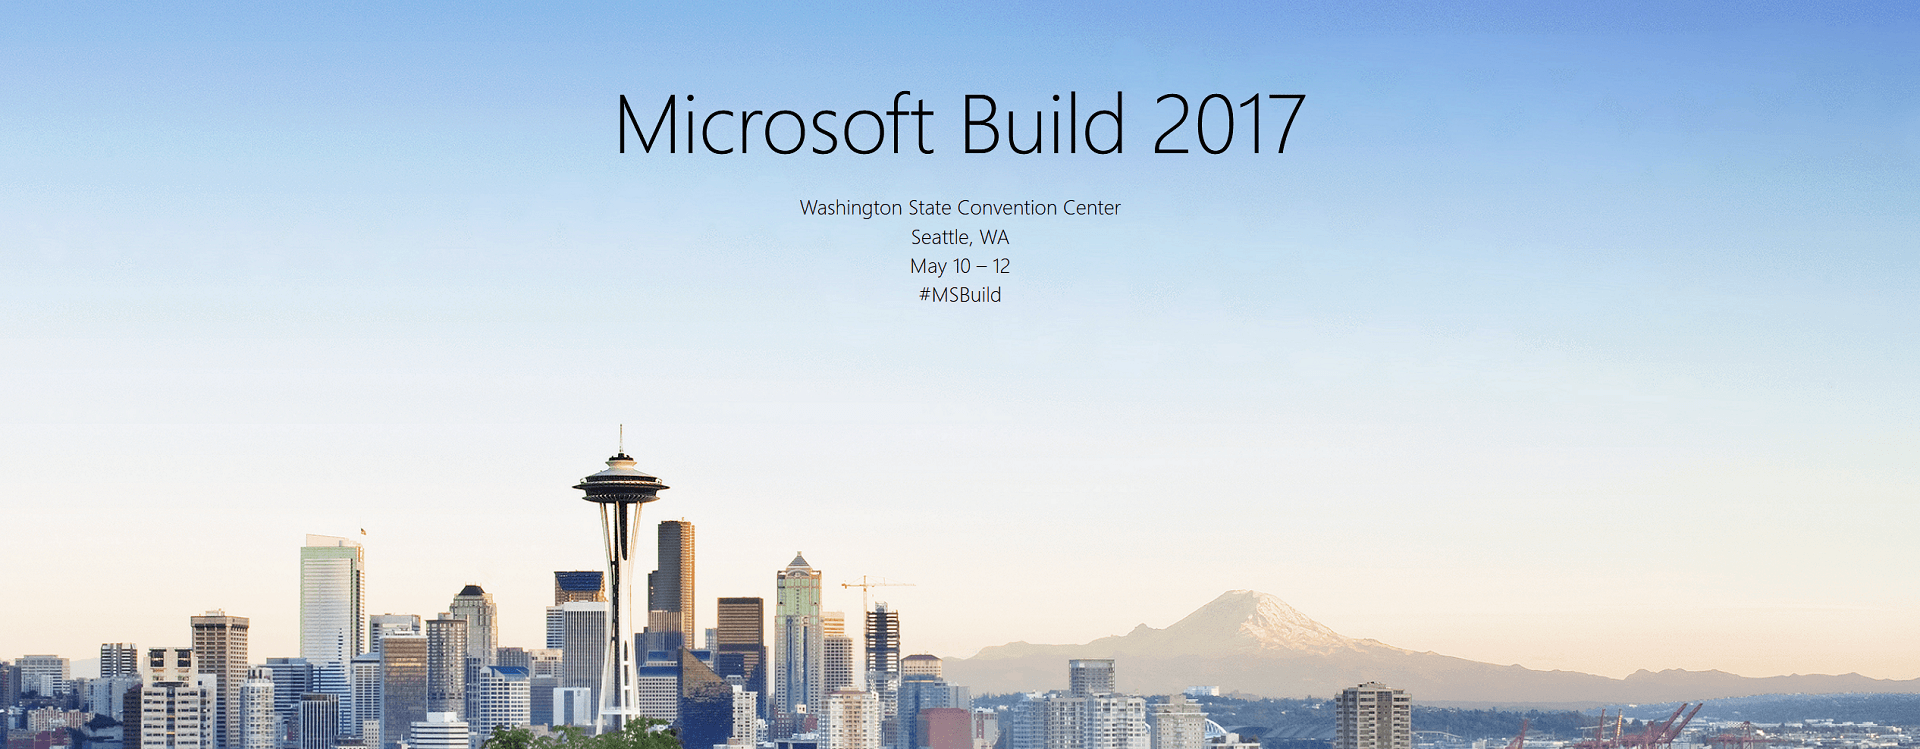 My Perspective of the Build 2017 Conference